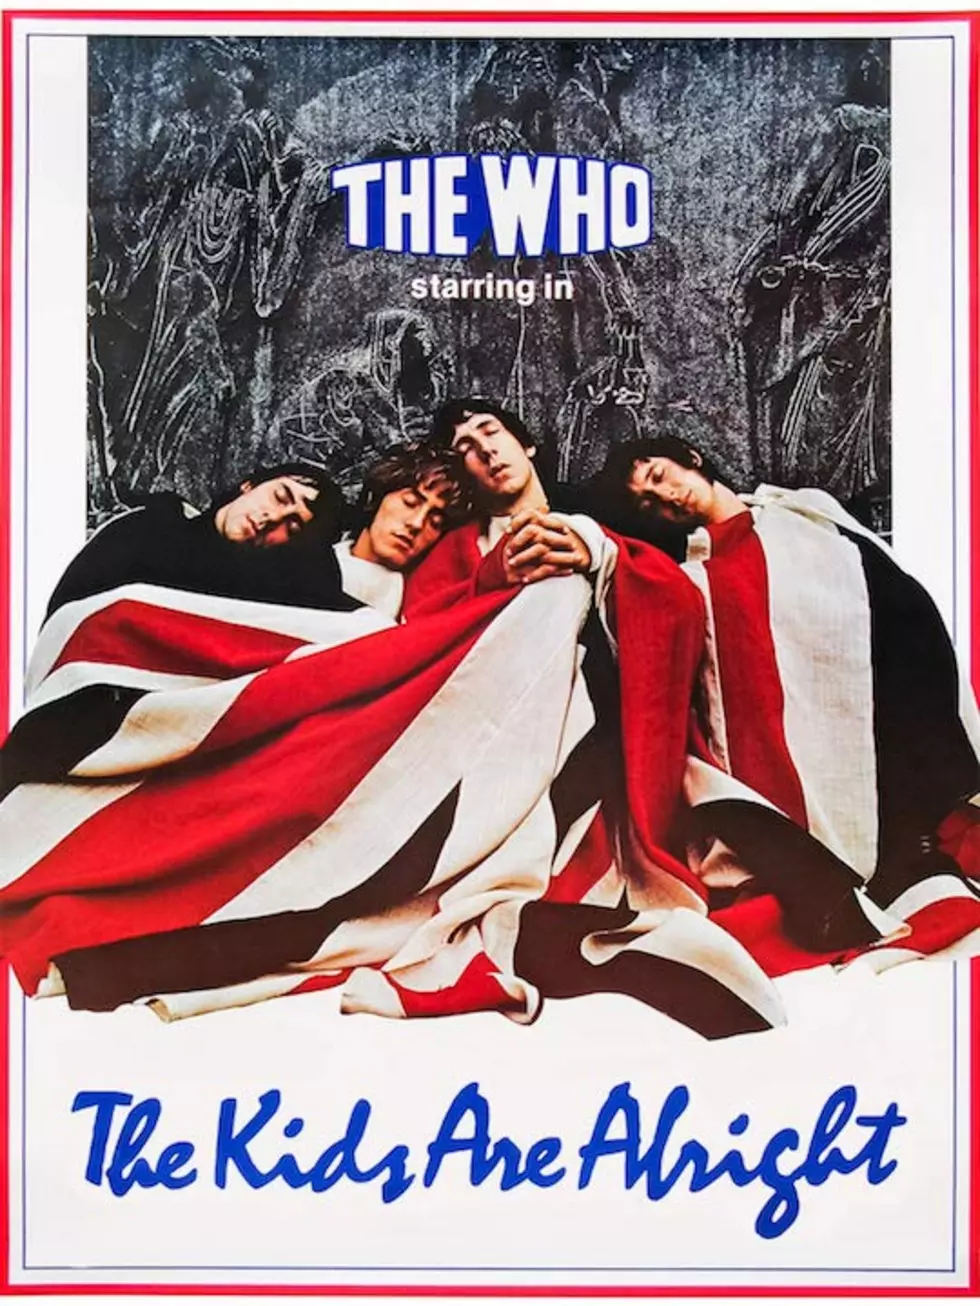 The Who Rumored to be Playing Jazz Fest In 2020